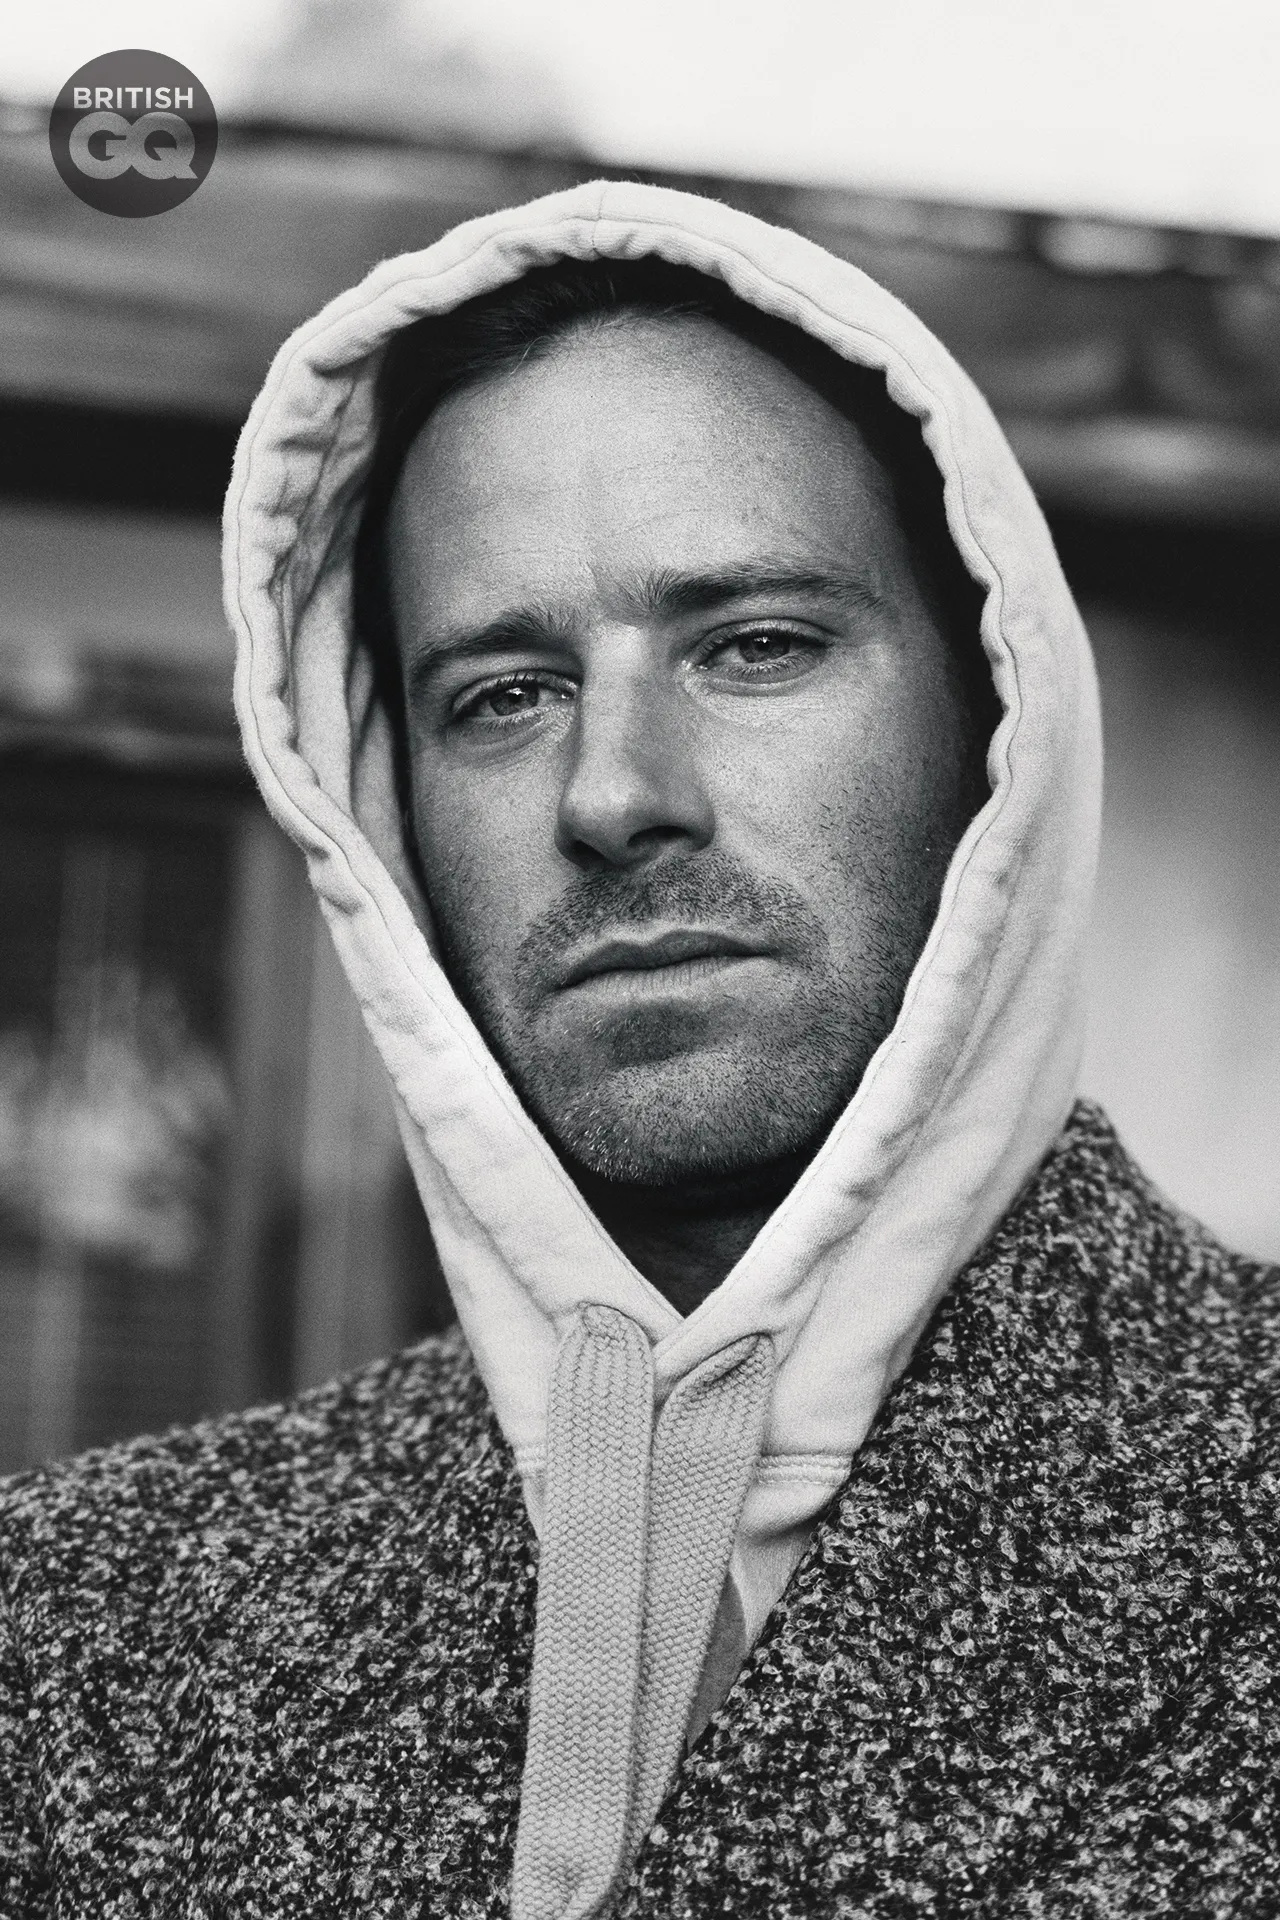 Armie Hammer movies, British GQ interview, Mental health advocacy, Actor's message, 1280x1920 HD Phone